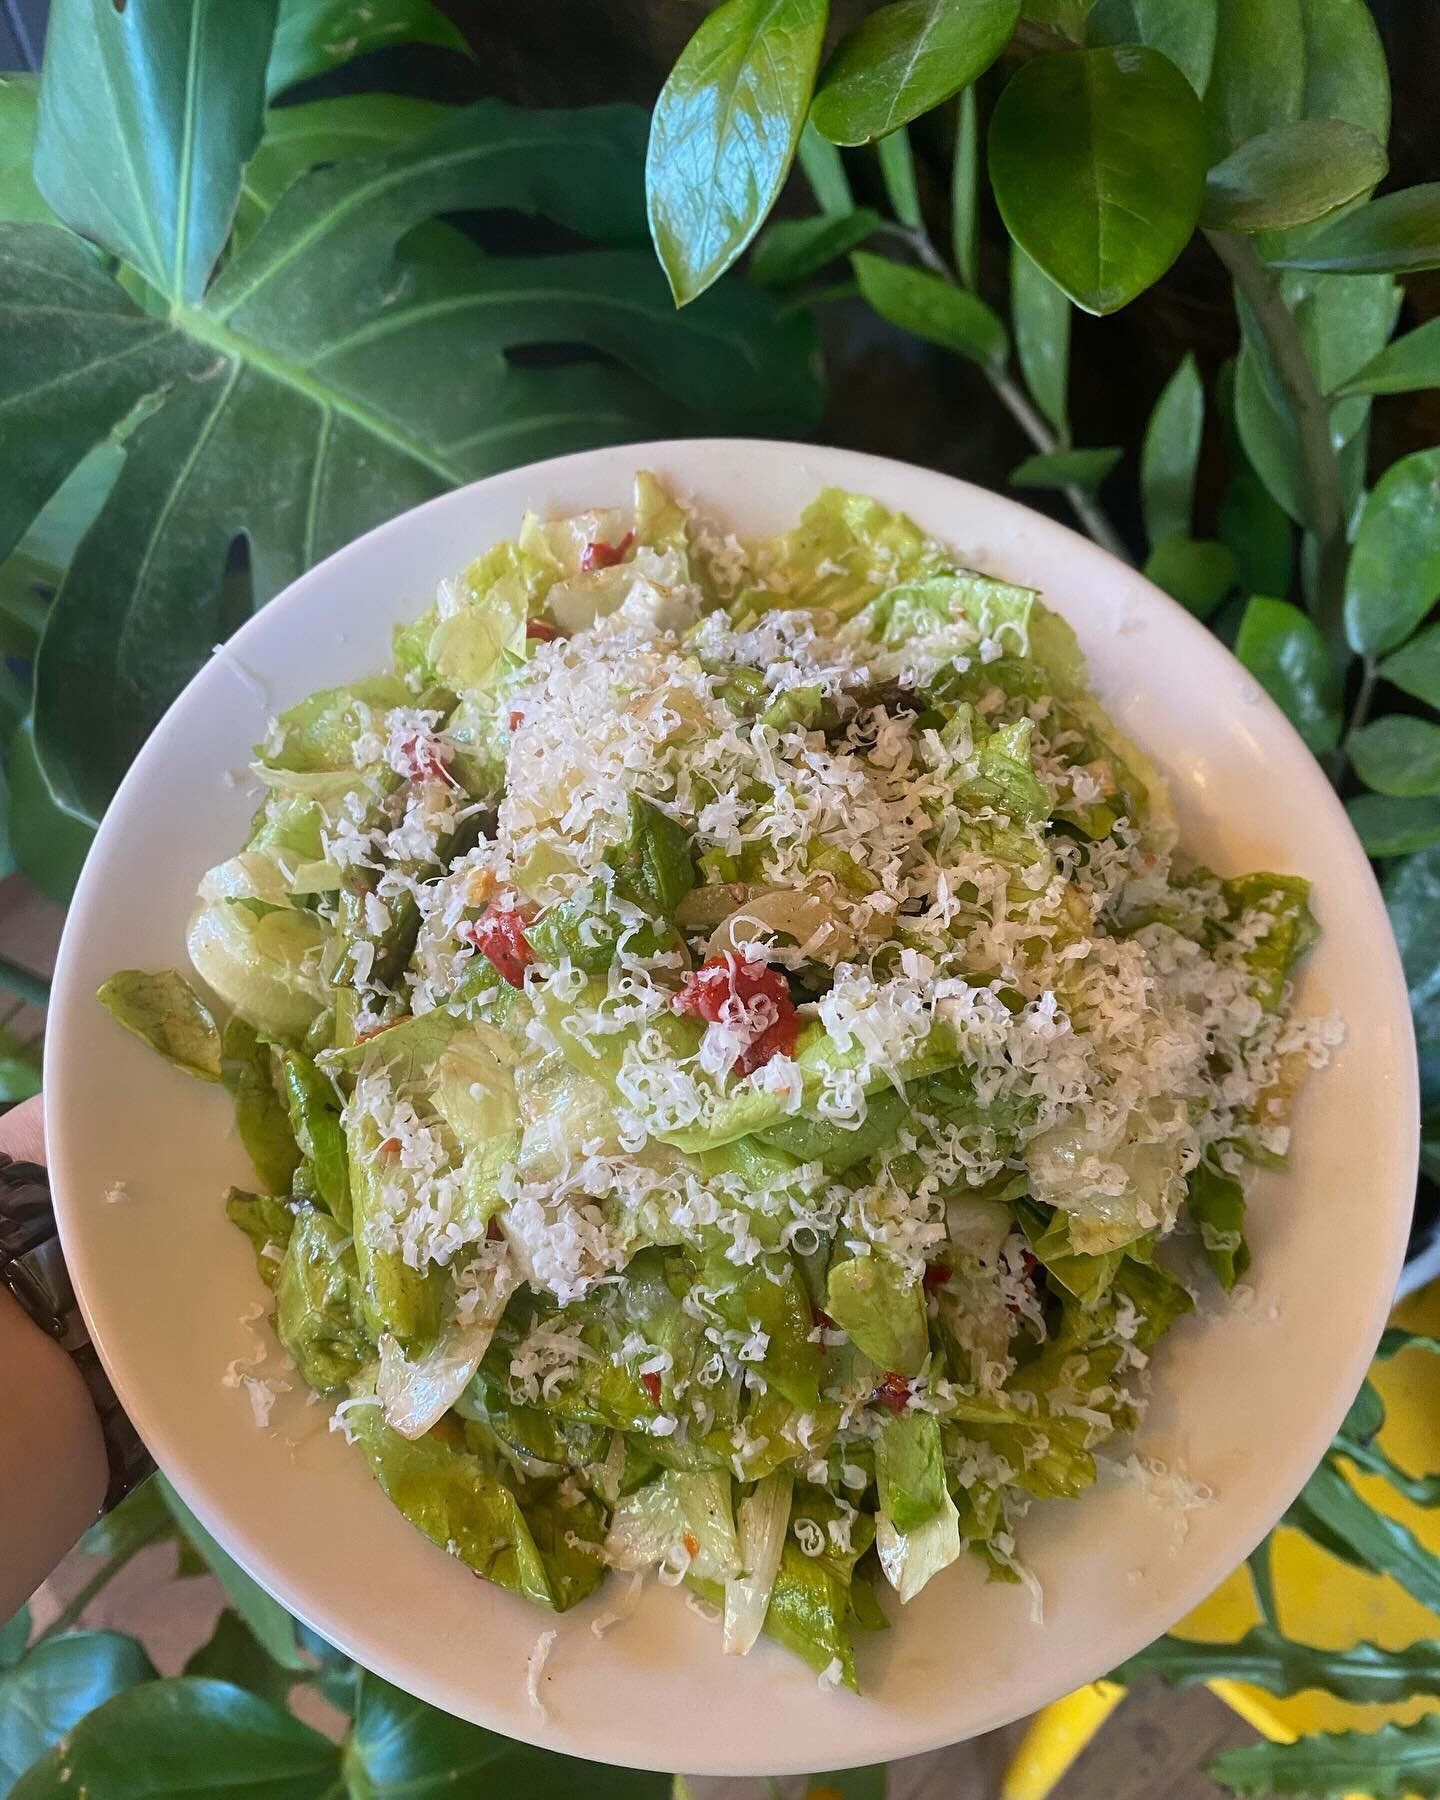 It&rsquo;s a beautiful day in the circle! ☀️☀️☀️

Stop by tonight and try our special salad with bibb lettuce, pickled banana peppers, roasted asparagus, marinated red peppers, manchego, and a sweet garlic vinaigrette 🤤